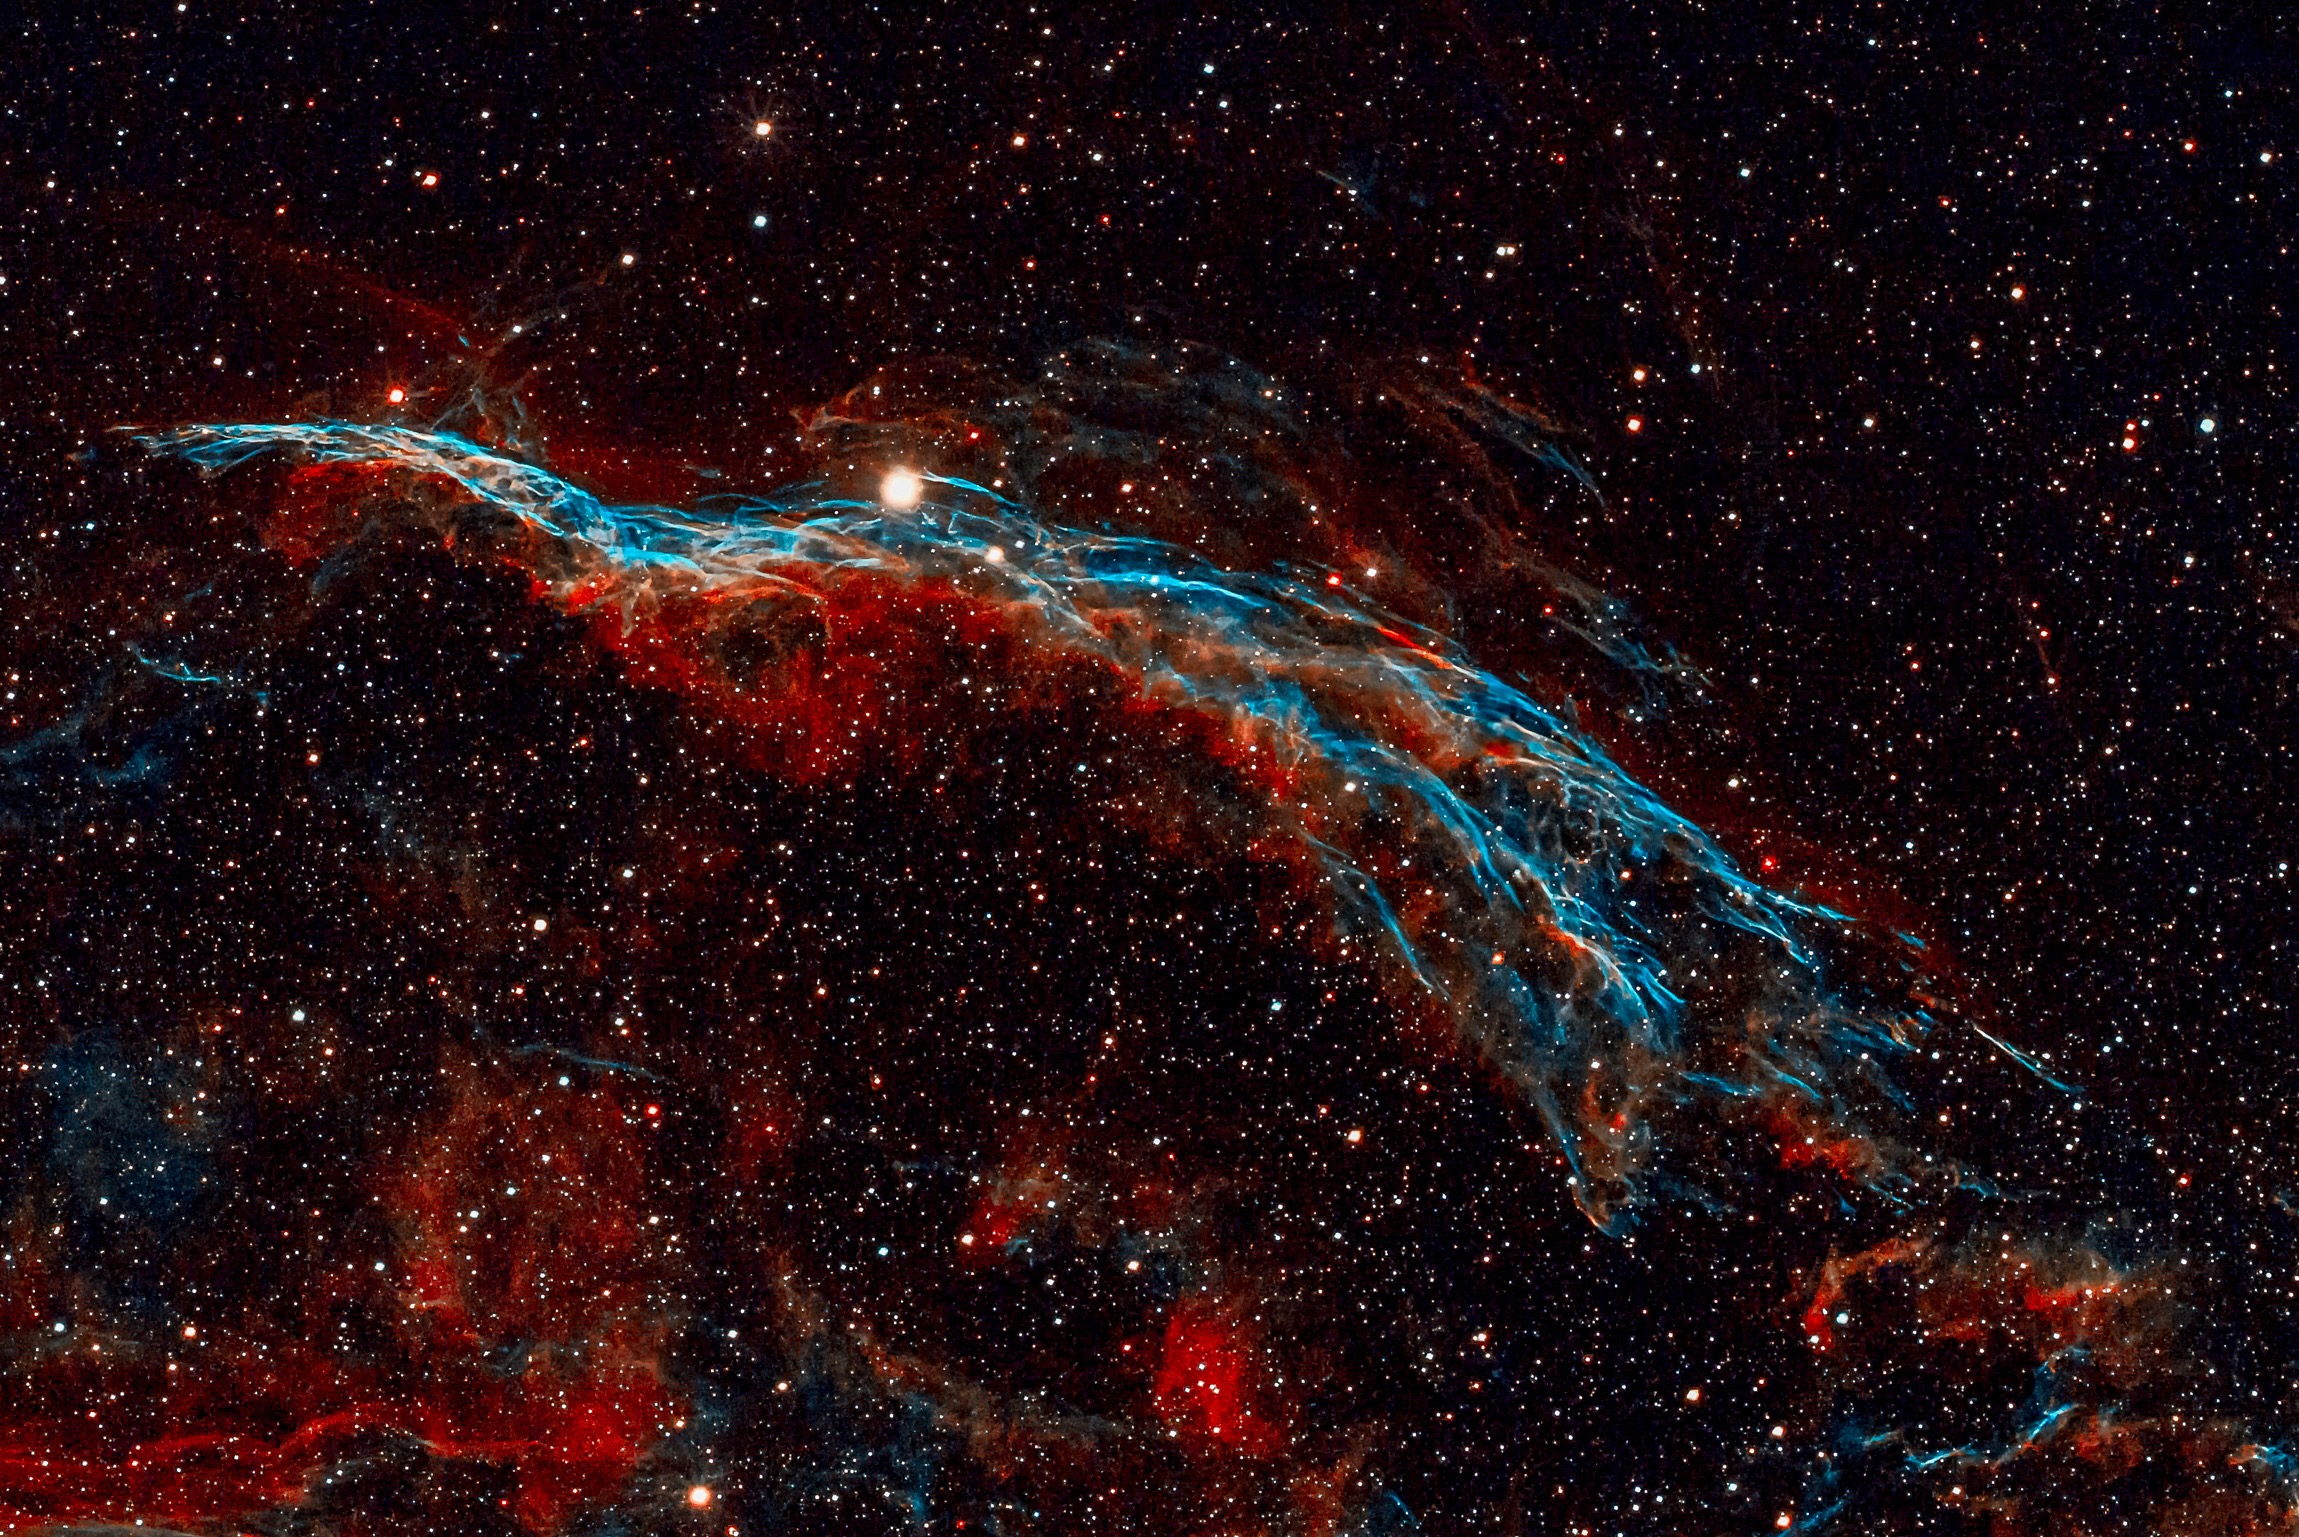 The Western Veil Nebula is a supernova remnant consisting of oxygen, sulfur, and hydrogen gas. This area of Cygnus is densely populated with stars and includes regions of heated gas that make up the Cygnus Loop.